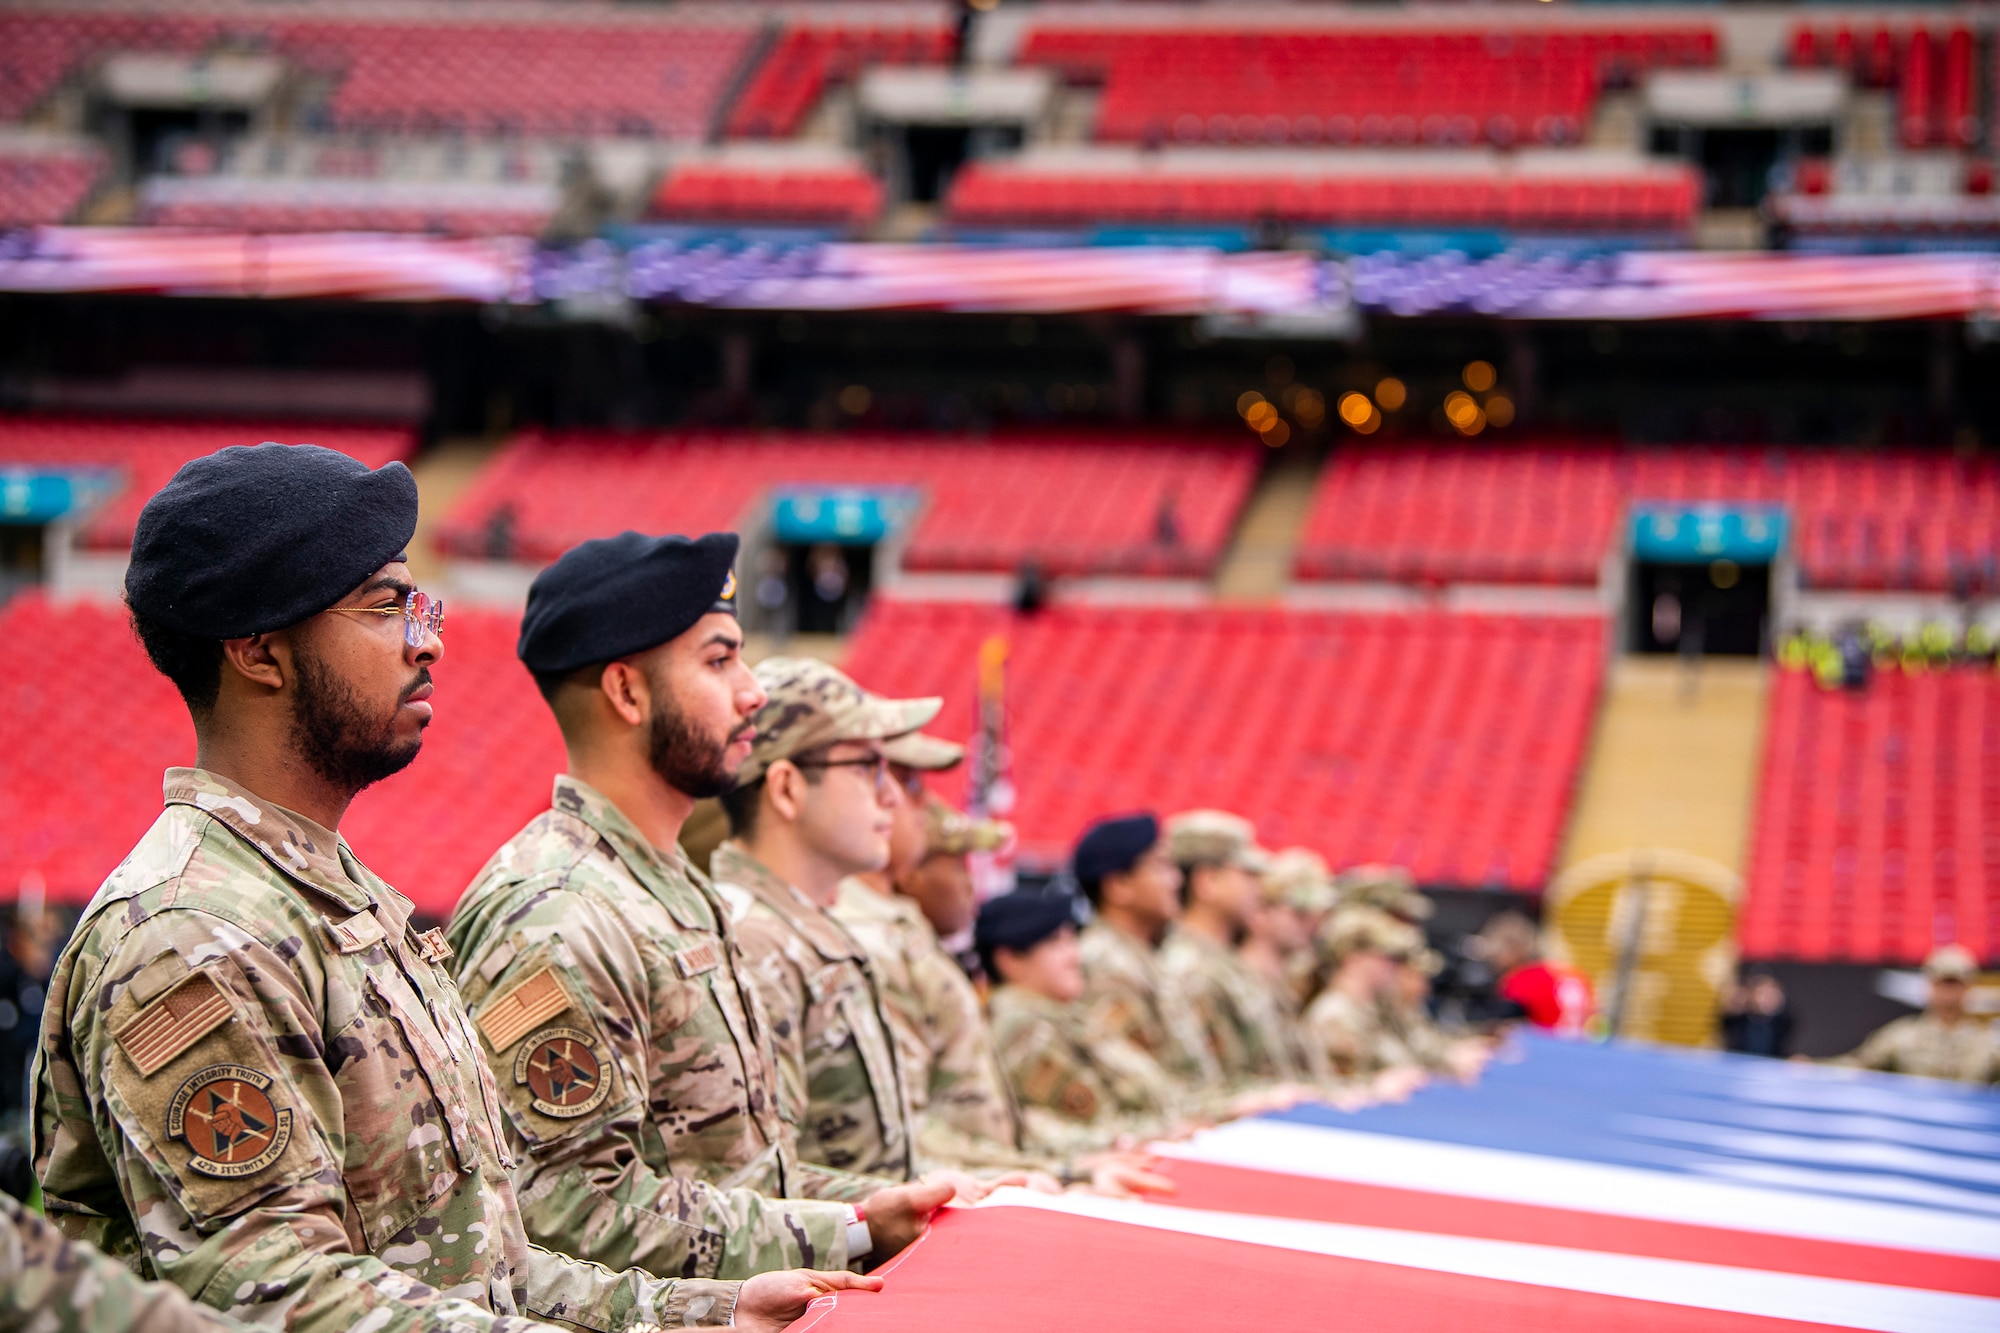 Airmen from the 501st Combat Support Wing rehearse unveiling an American flag at Wembley Stadium, in London, England, Oct. 30, 2022. Approximately 70 uniformed personnel represented the U.S. Air Force and nation by unveiling an American flag during the pre-game ceremonies of the Jacksonville Jaguars and Denver Broncos NFL game. (U.S. Air Force photo by Staff Sgt. Eugene Oliver)